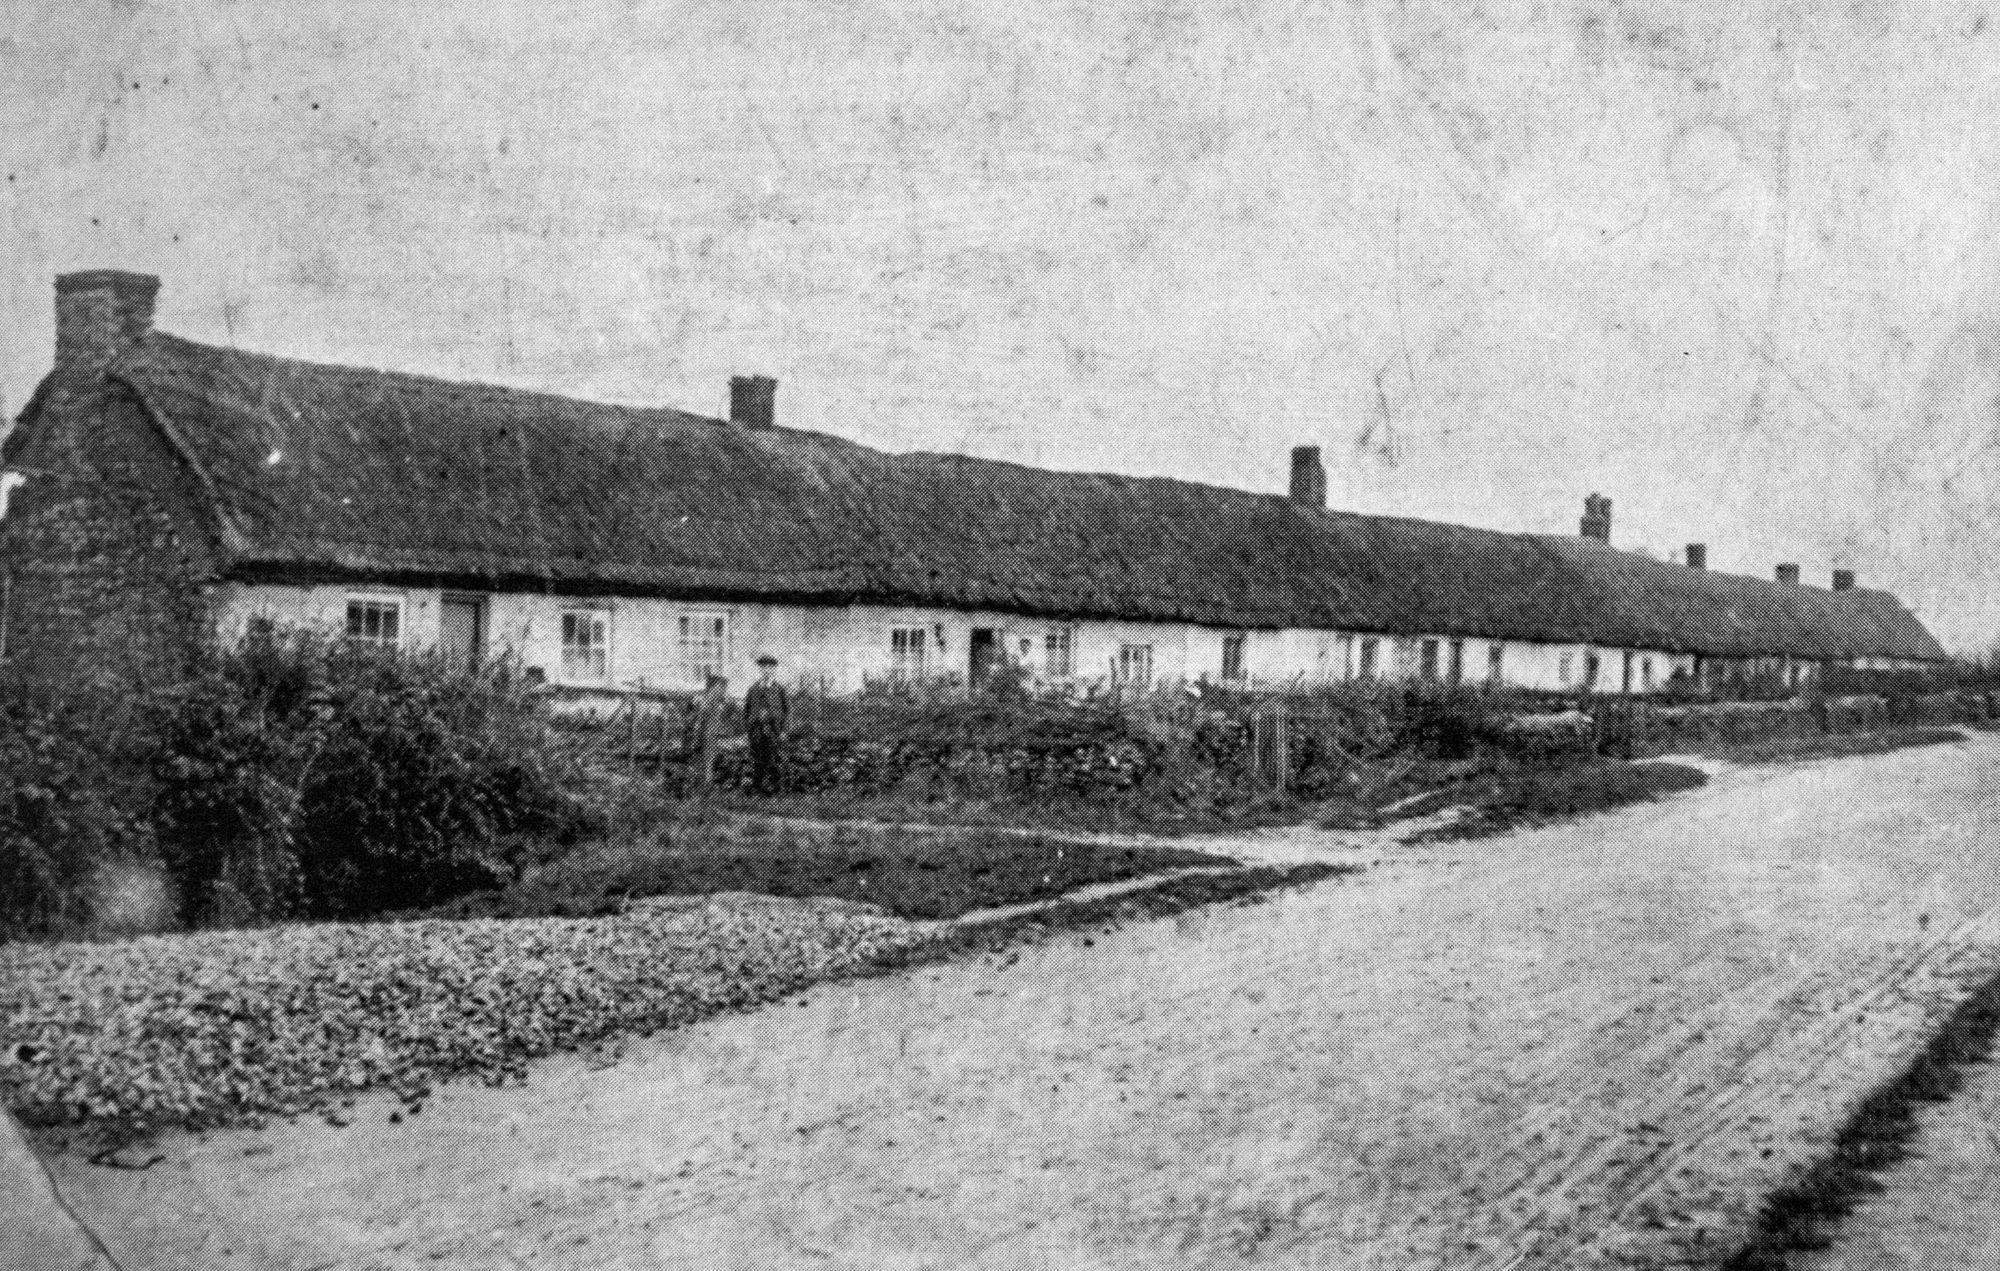 Banbury Road cottages in the 1900s.